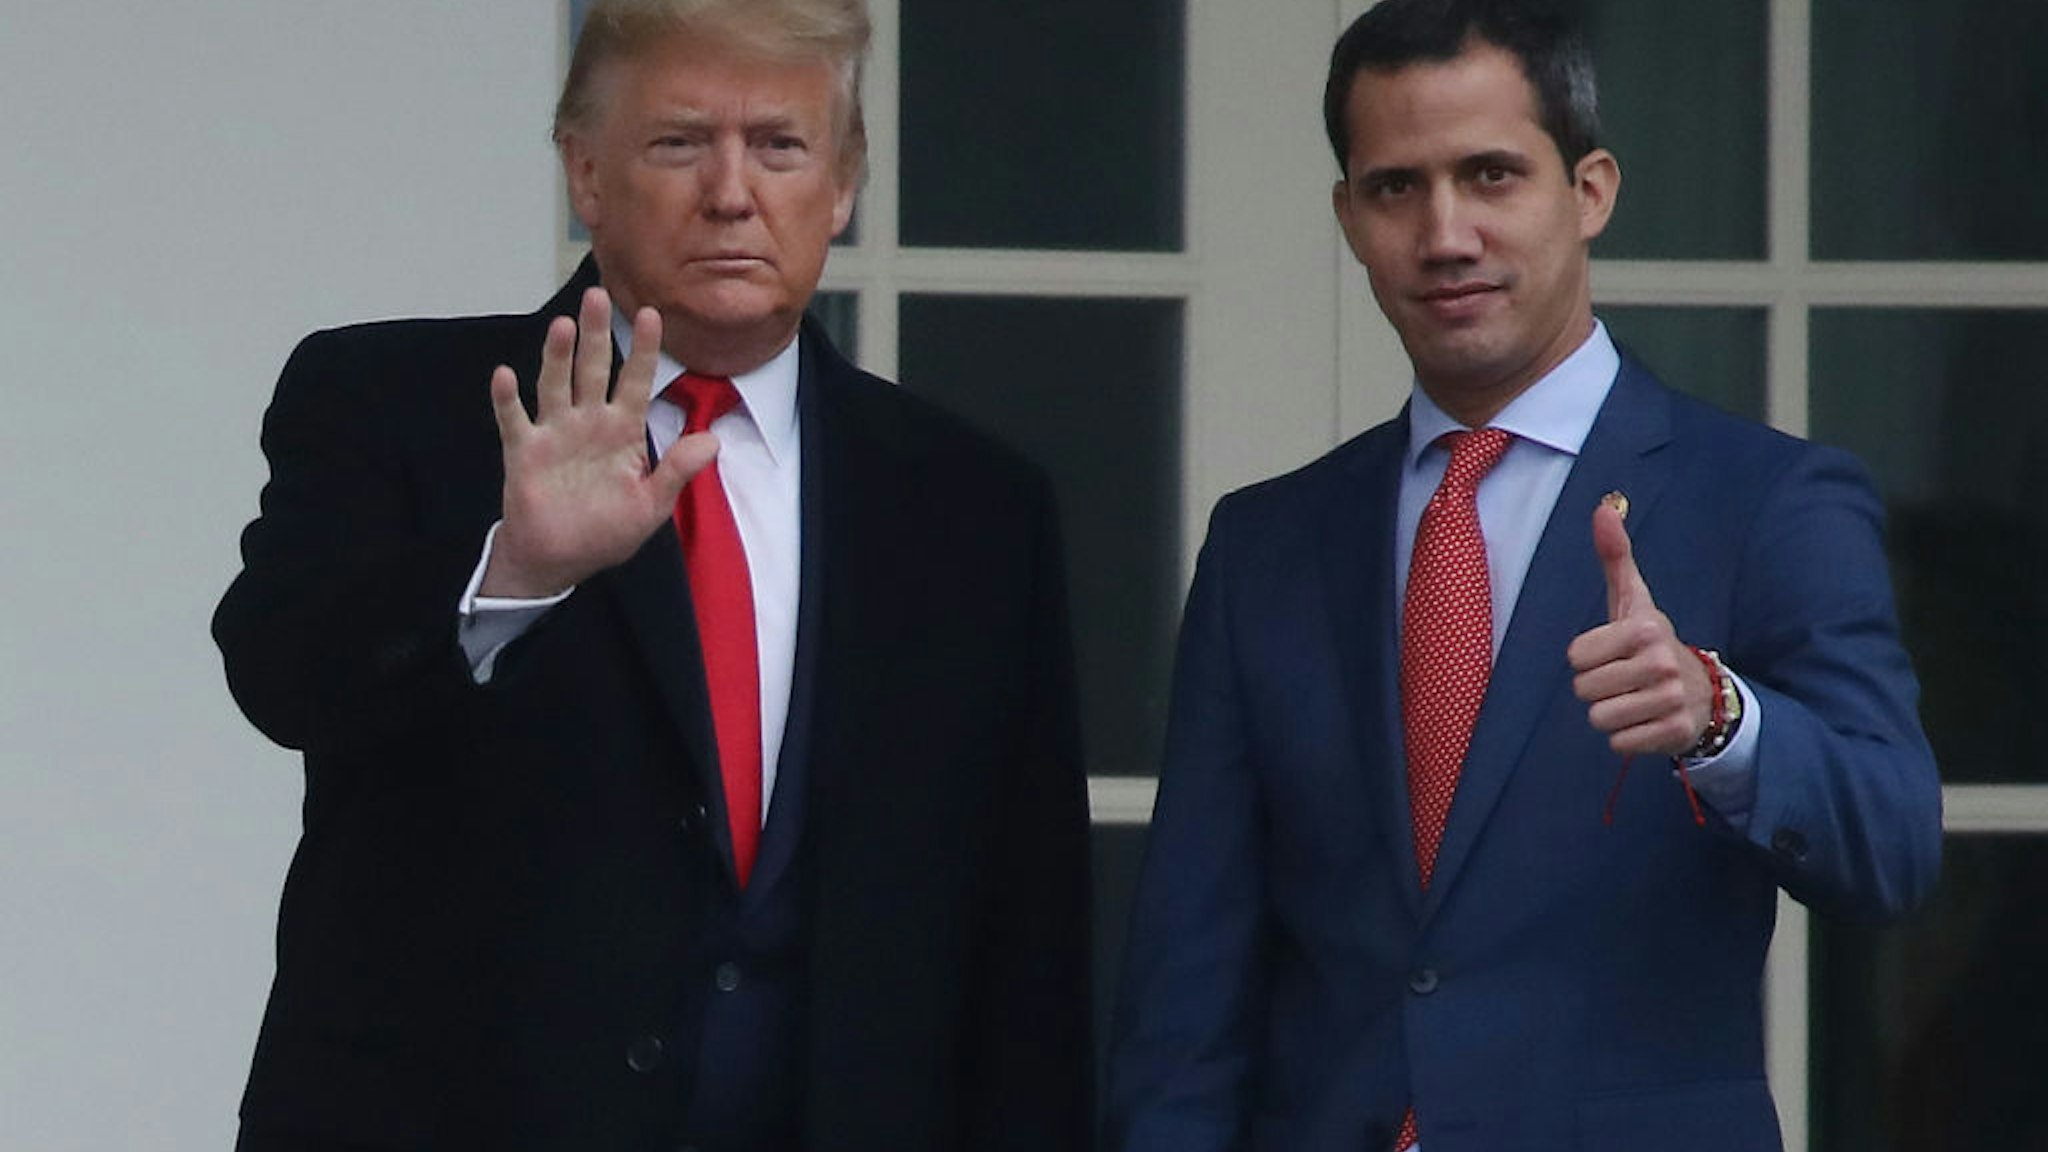 U.S. President Donald Trump walks with Interim President of the Bolivarian Republic of Venezuela, after his arrival at the White House, on February 5, 2020 in Washington, DC.